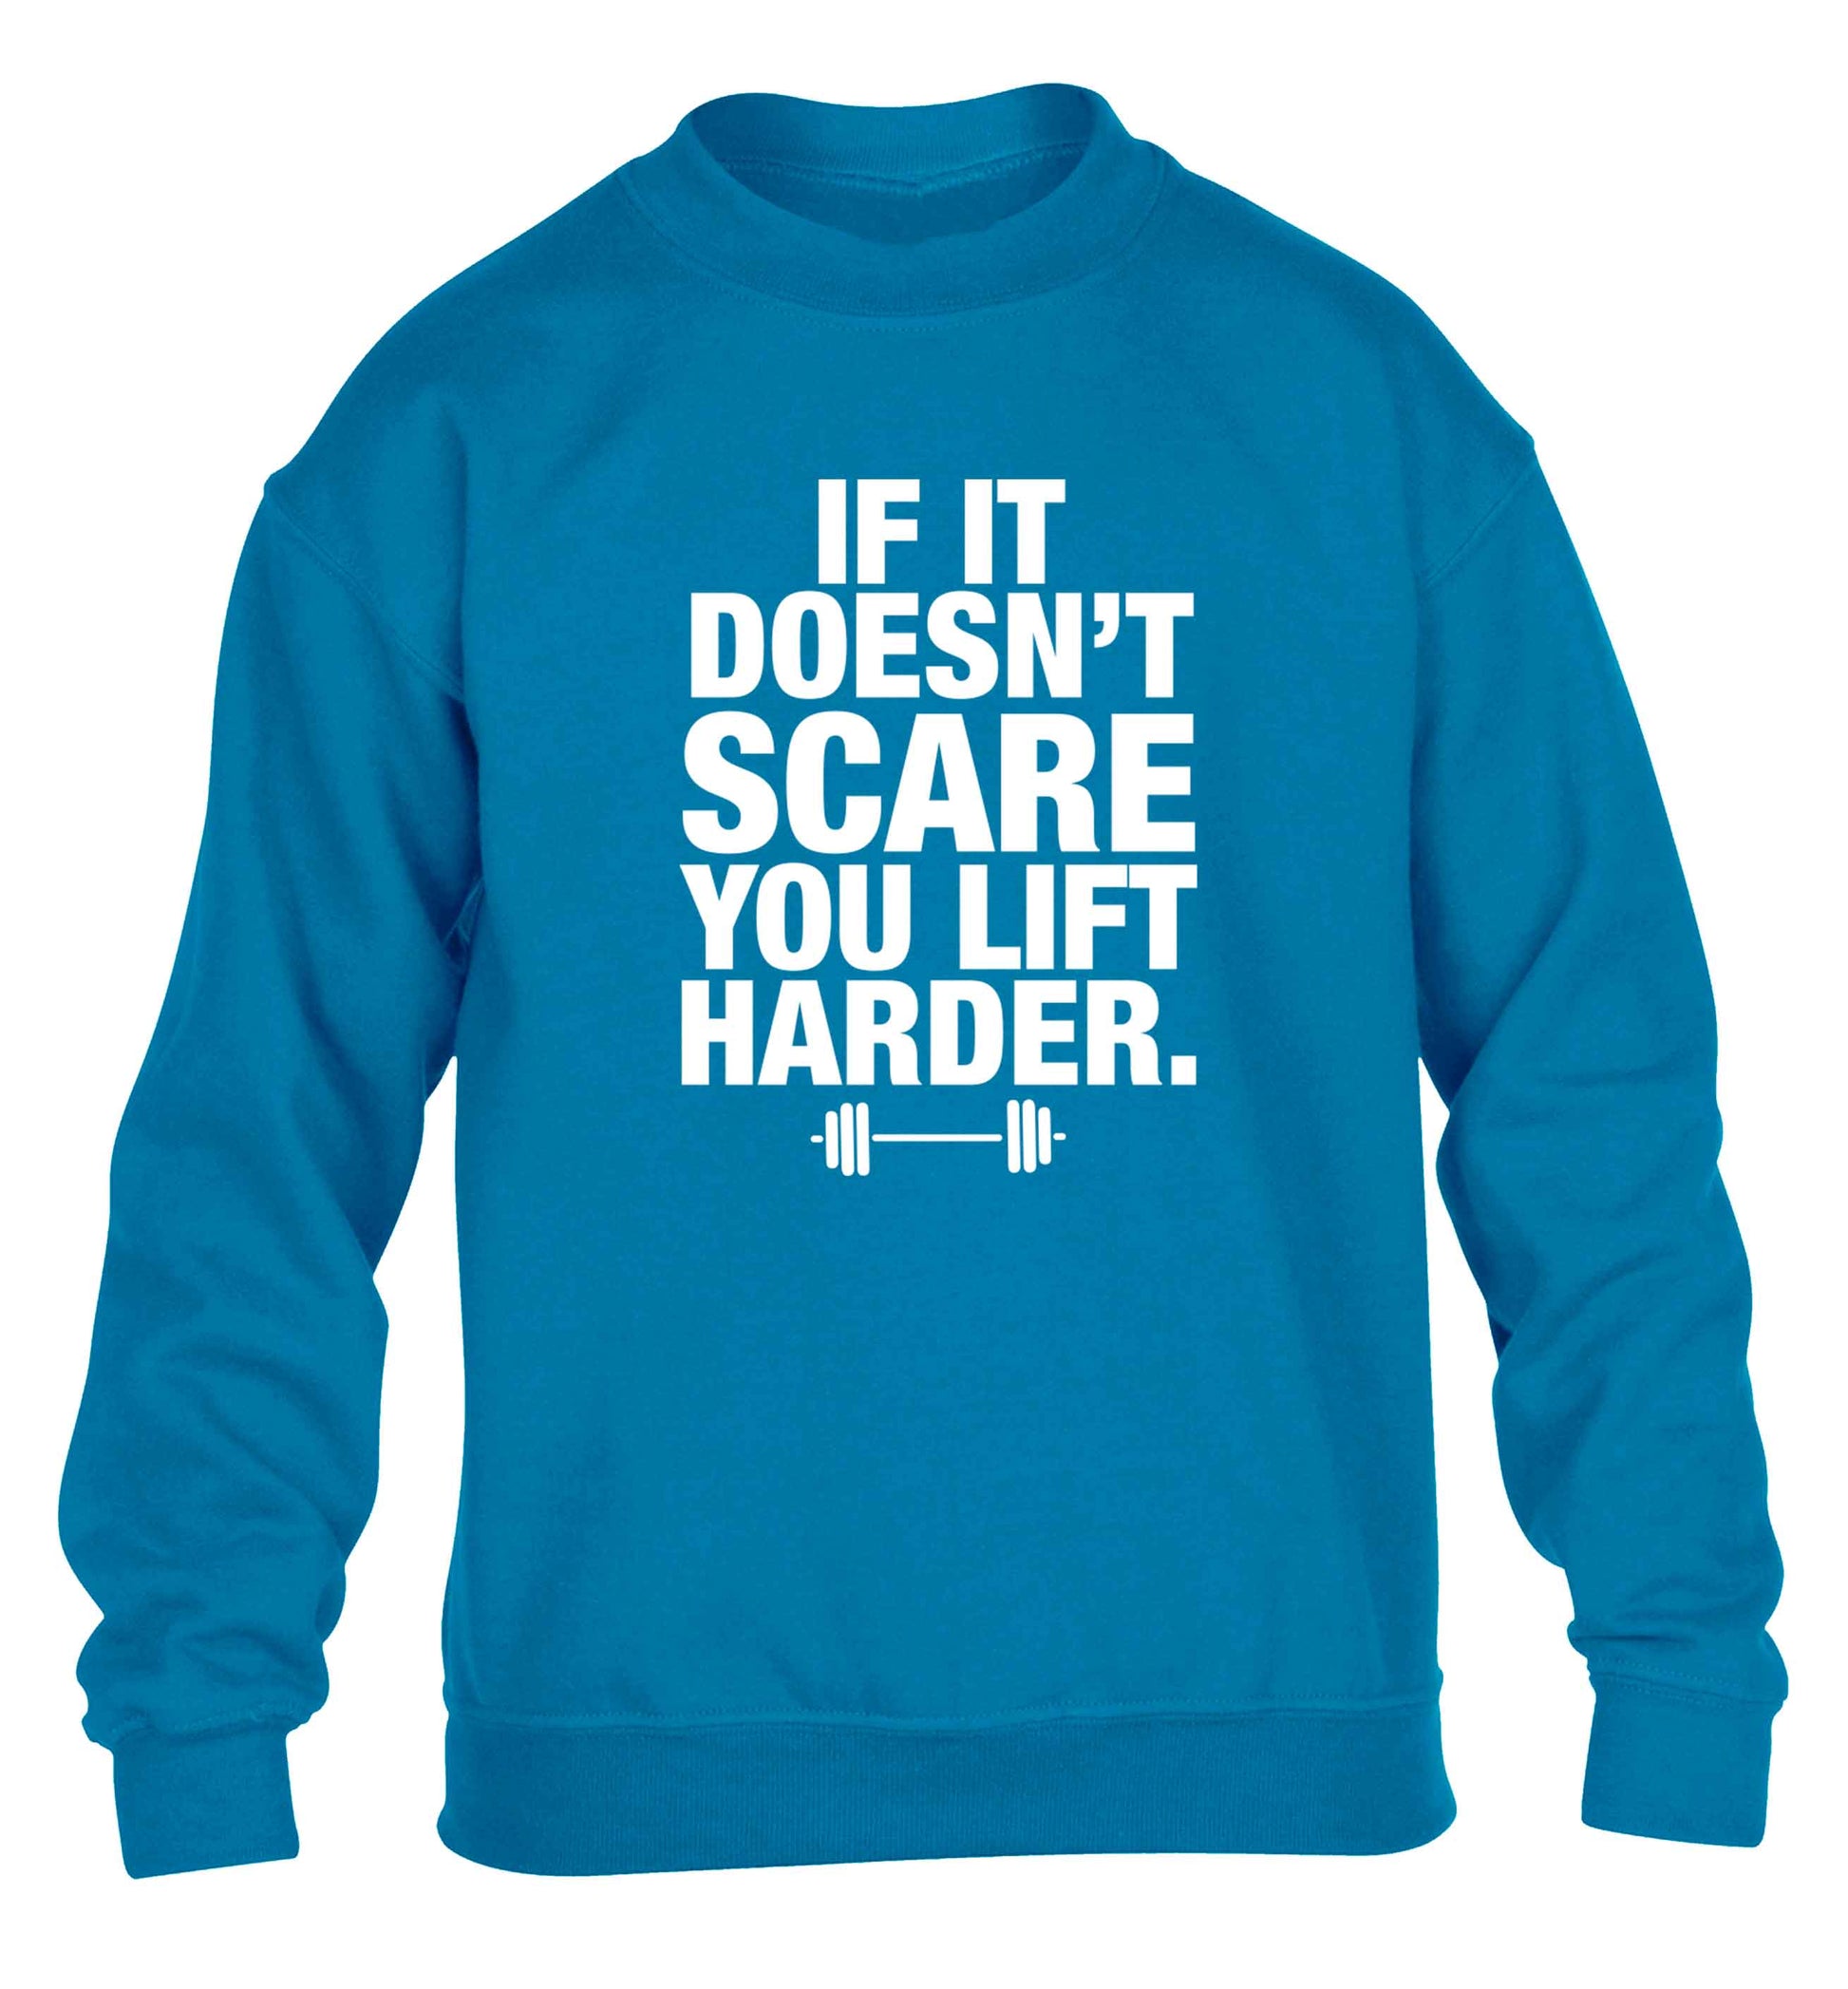 If it doesnt' scare you lift harder children's blue sweater 12-13 Years